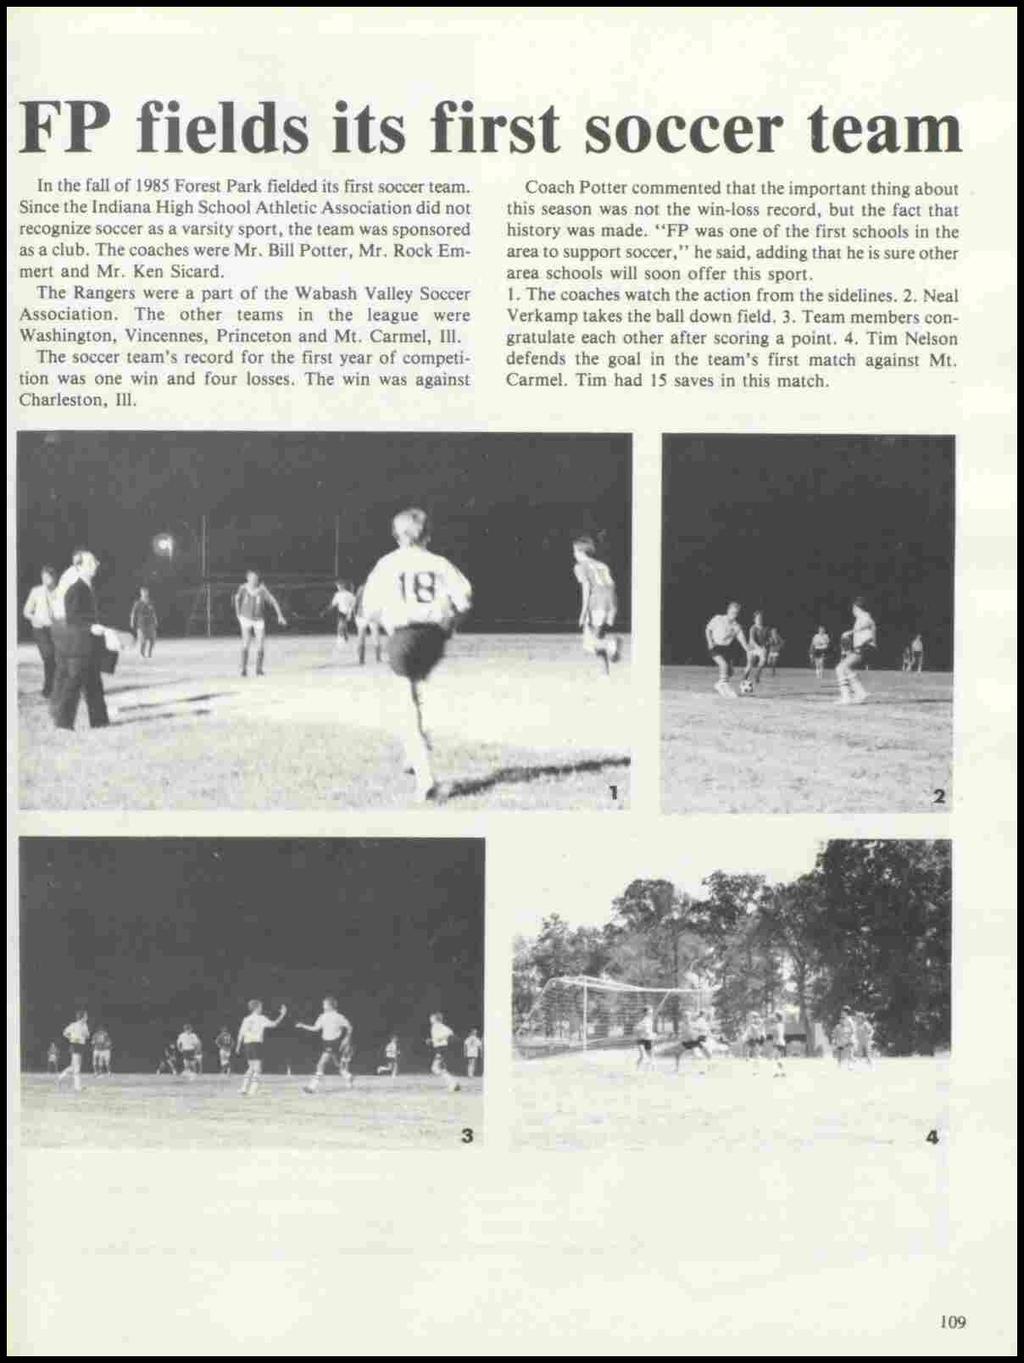 FP fields its first soccer team In the fall of 1985 Forest Park fielded its first soccer team.